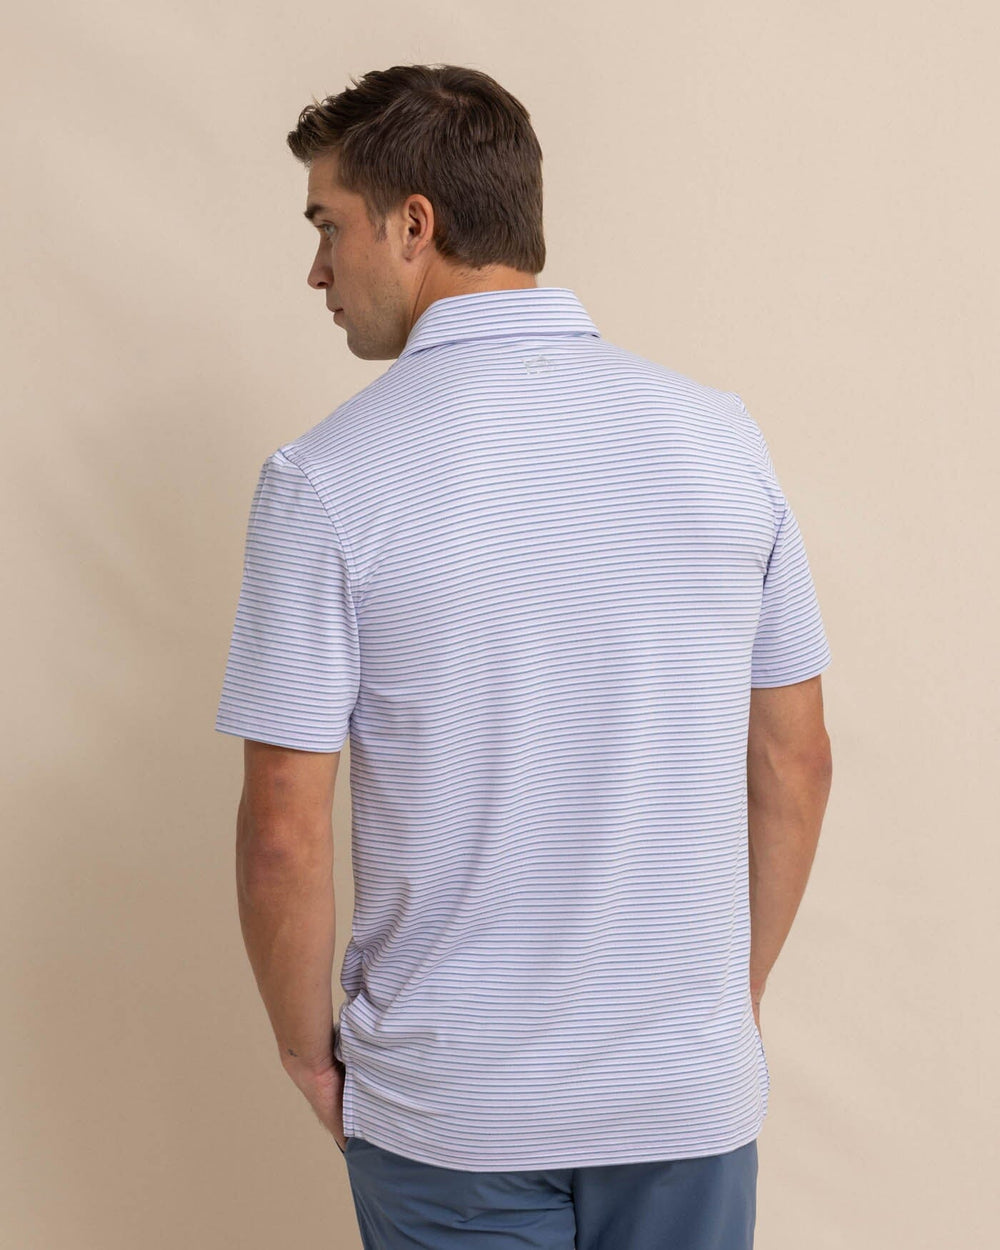 The back view of the Southern Tide Ryder Heather Halls Performance Polo by Southern Tide - Heather Orchid Petal